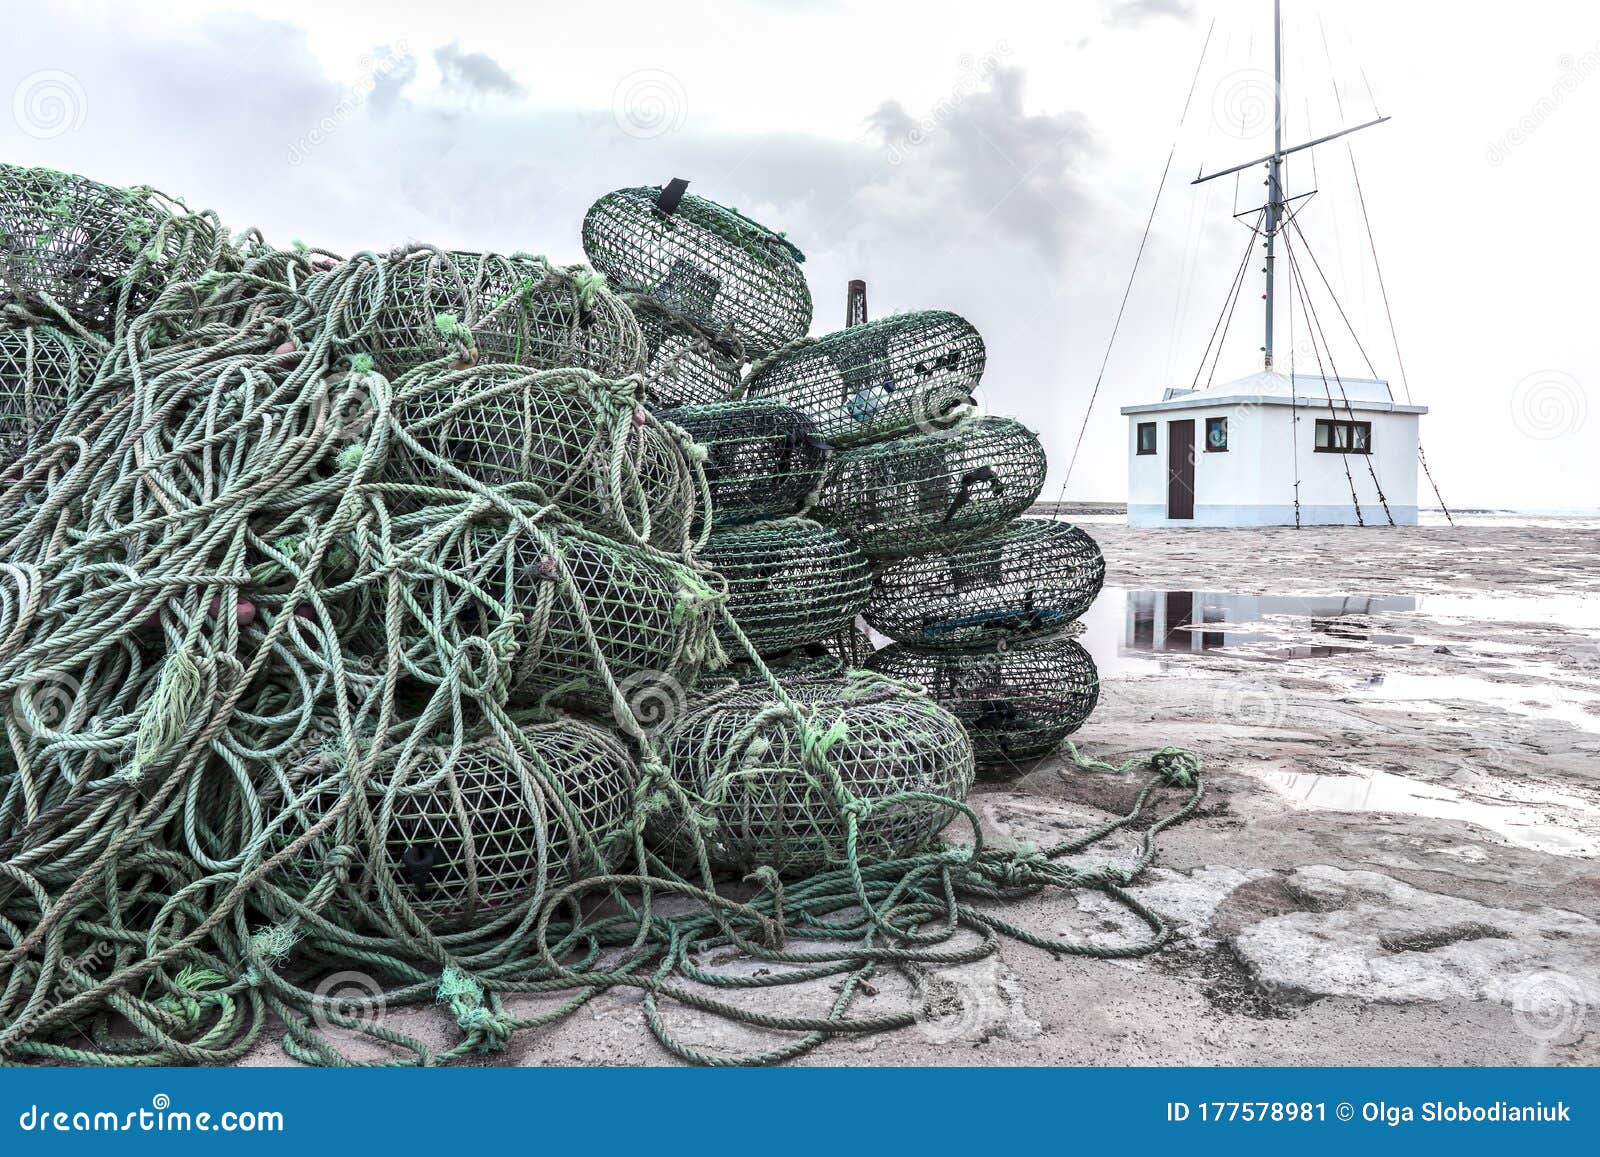 Dock Littered With Empty Fishing Baskets Near A Small Building Stock Image - Image of building ...